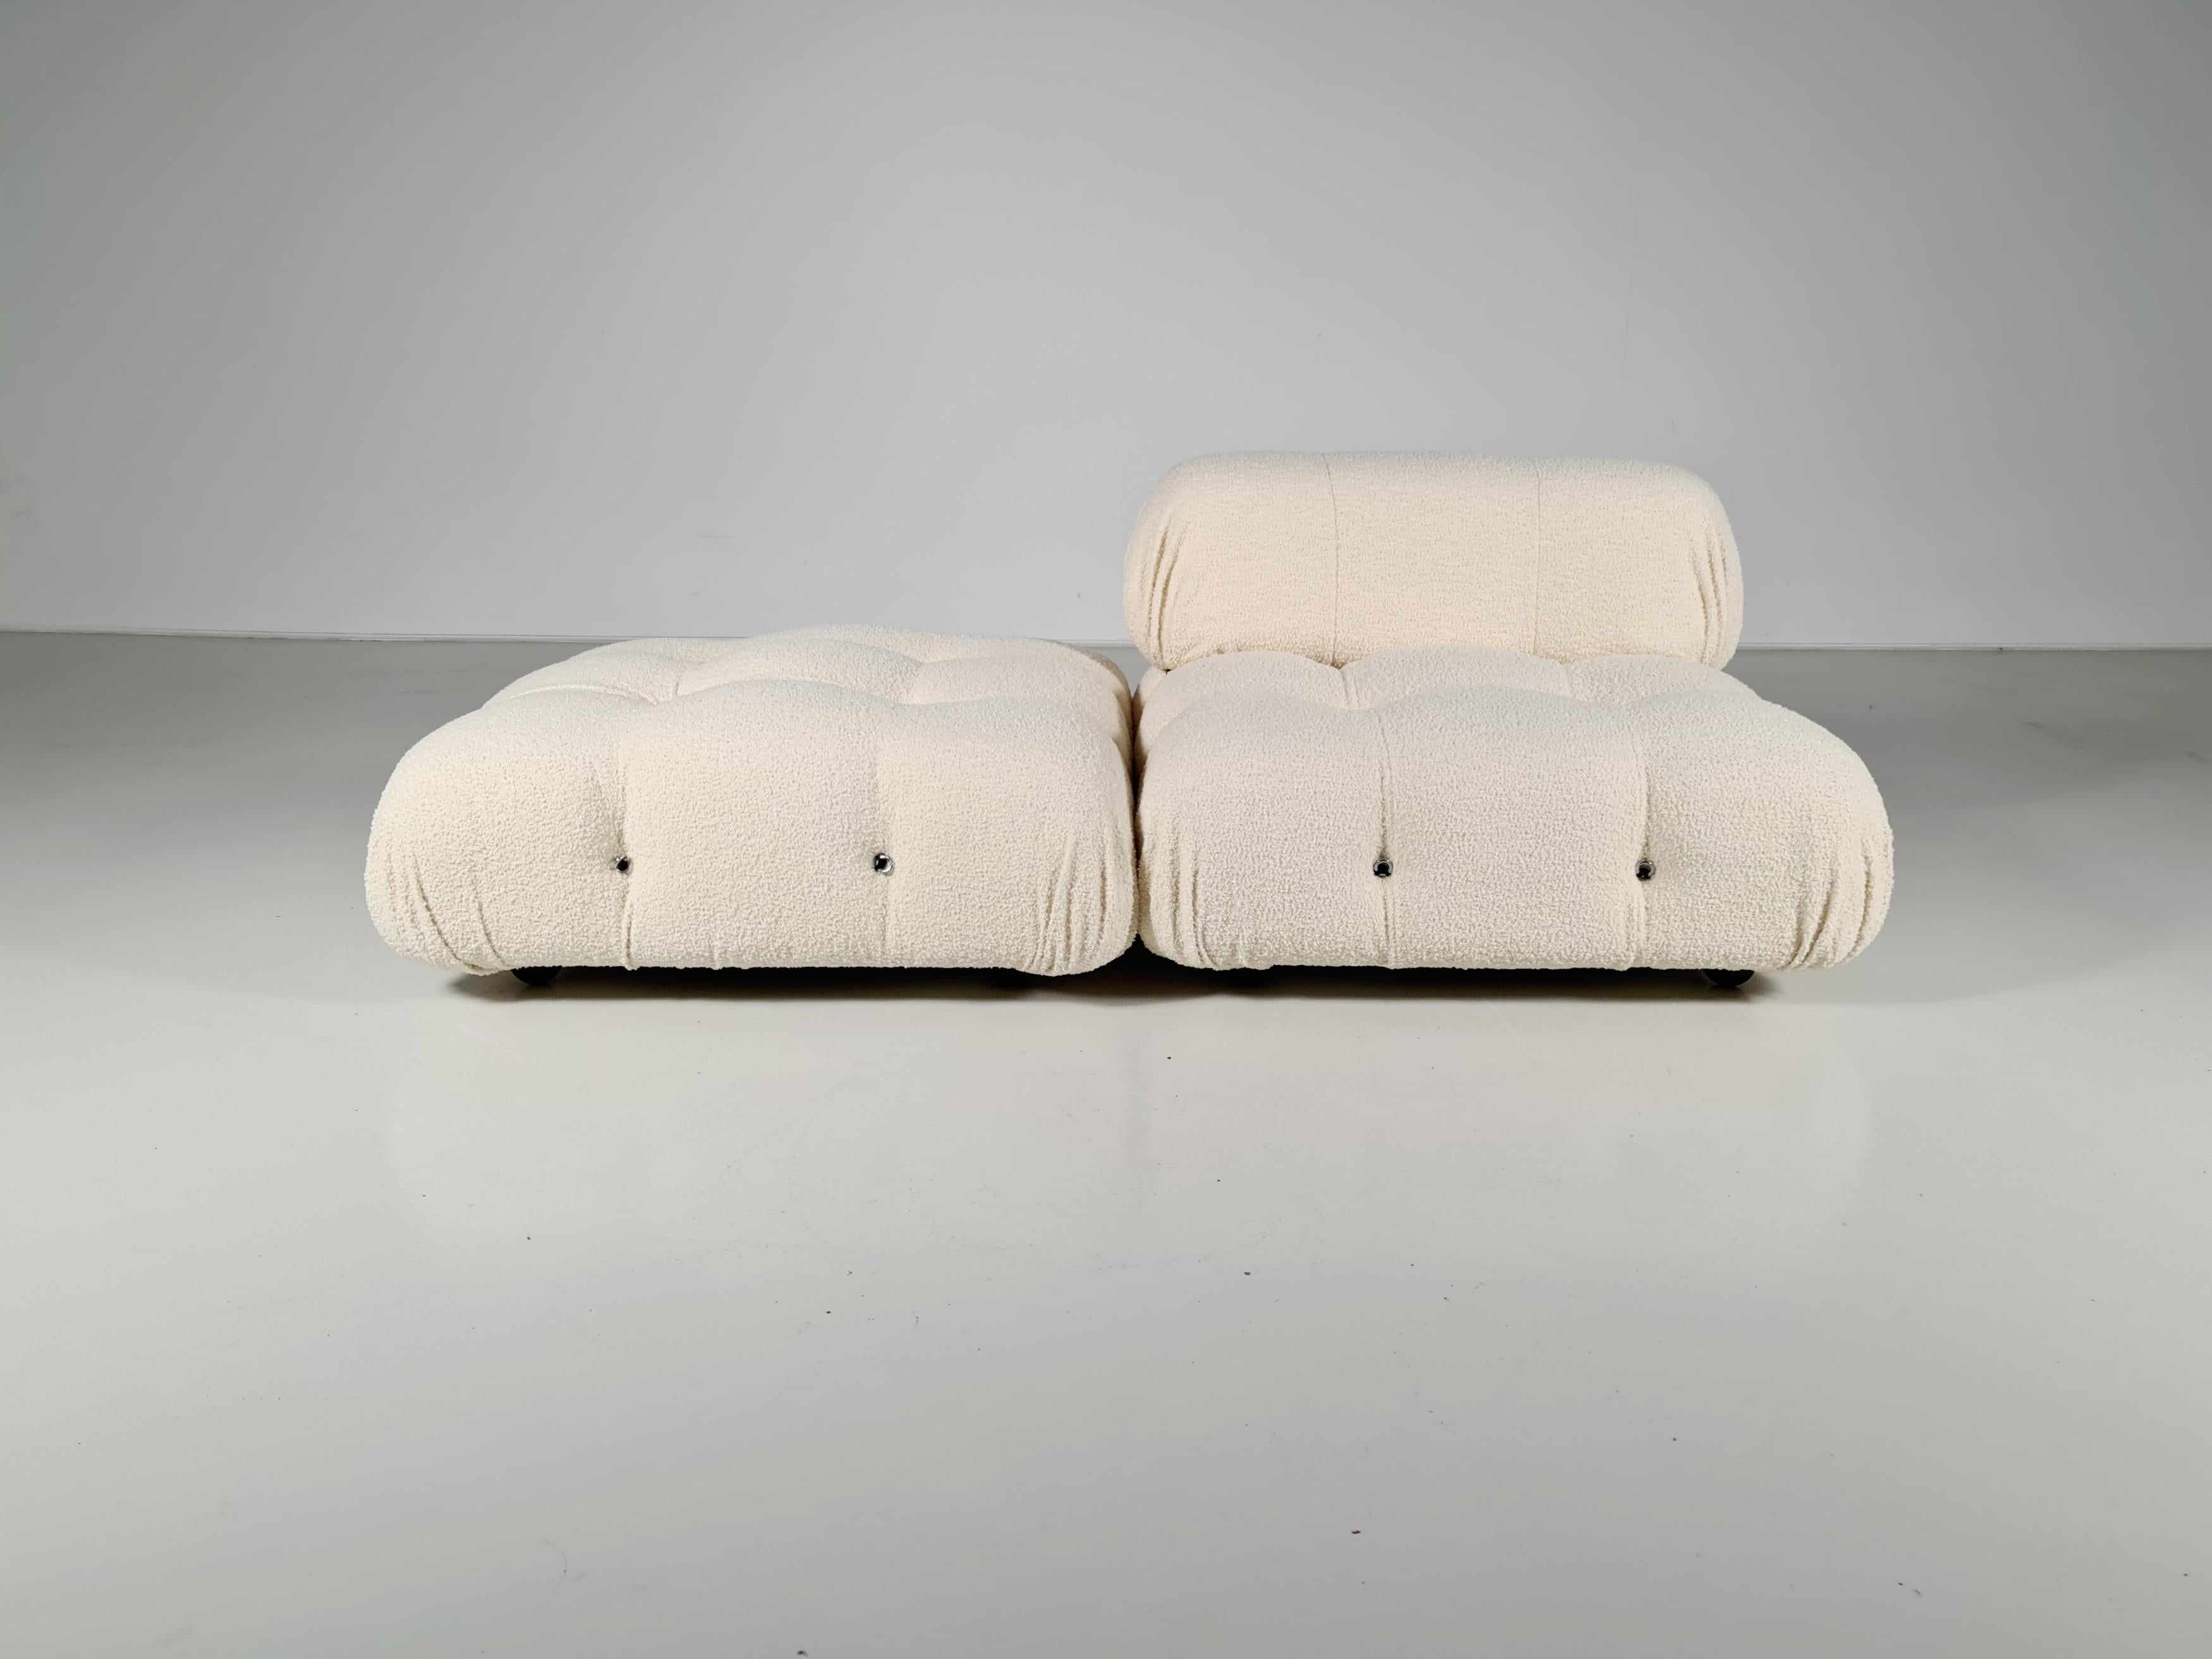 A stunning 2-piece modular Camaleonda set designed by Mario Bellini for B&B Italia. Beautiful Italian design piece from the early 1970s. You can configure as you wish. Reupholstered in beautiful creme boucle from Bisson Bruneel.